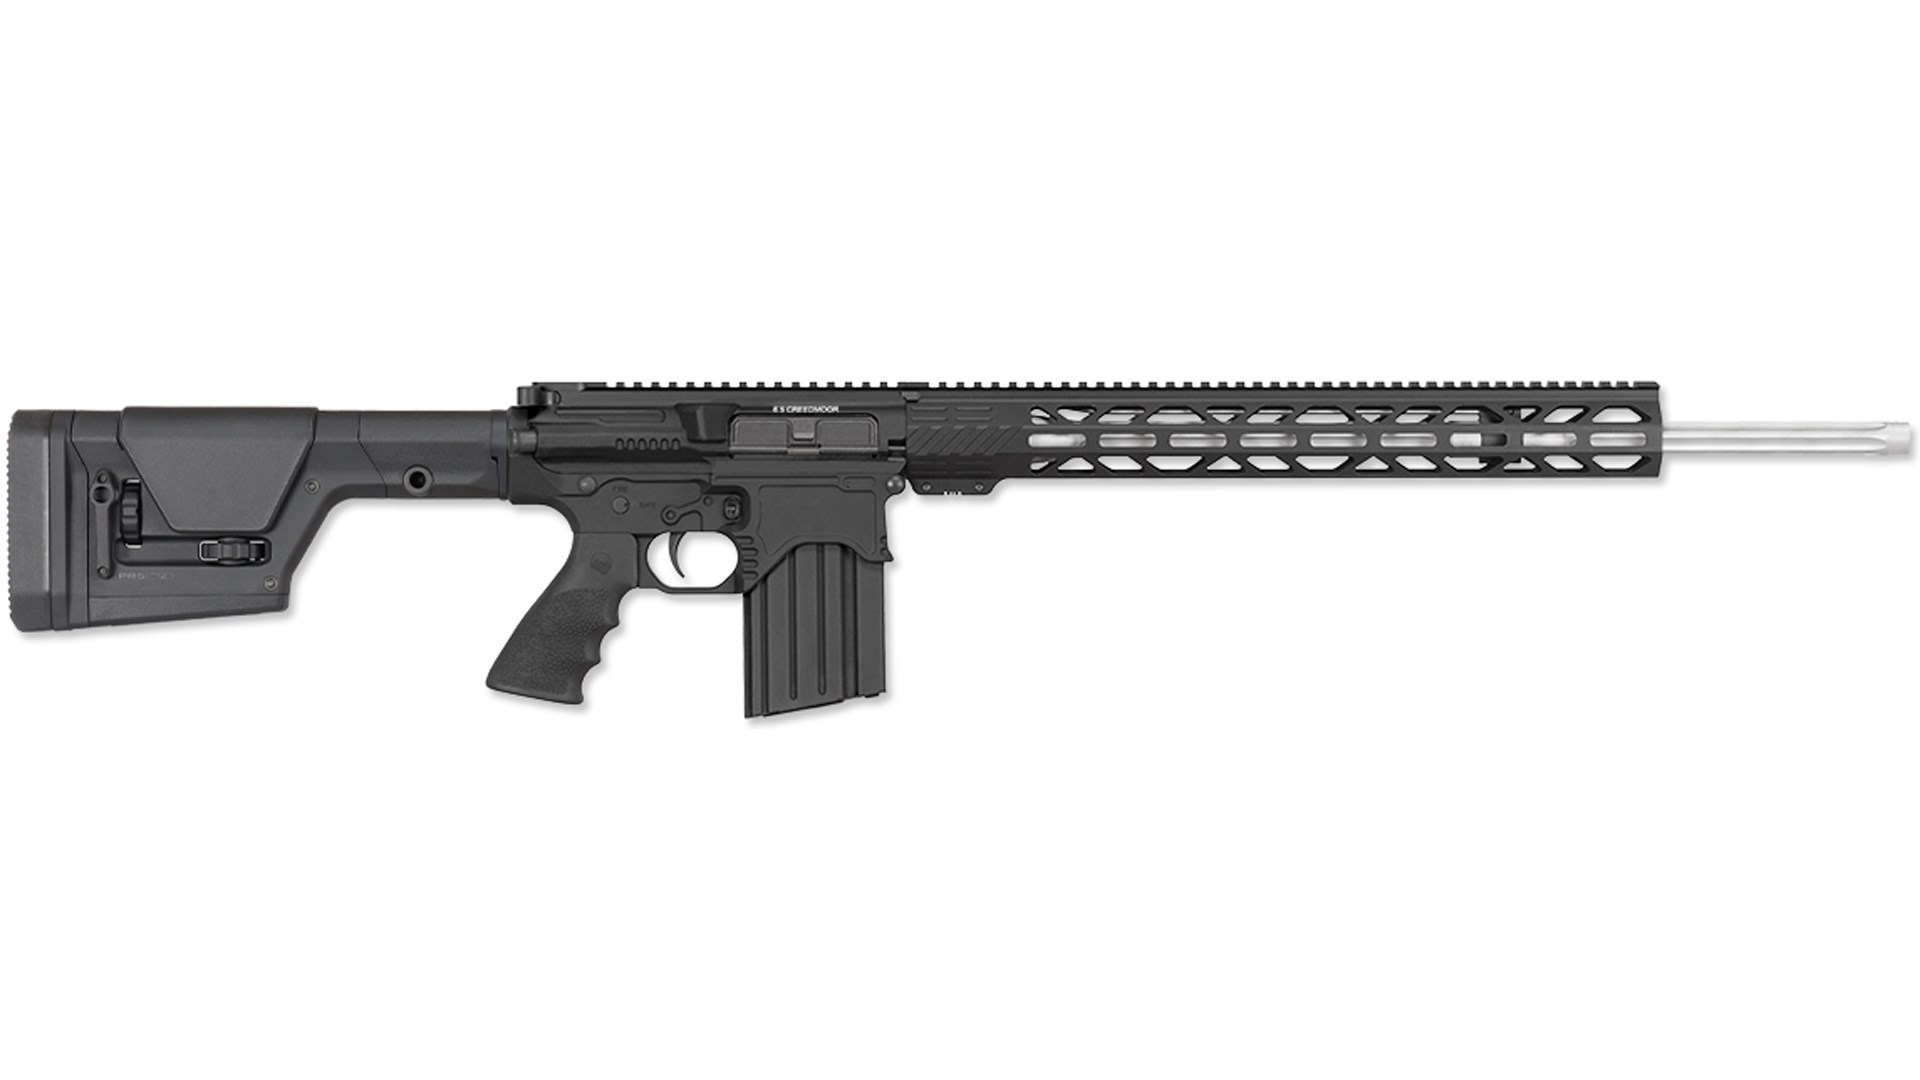 Right side of the Rock River Arms BT3 Predator HP 65C rifle equipped with a Magpul PRS buttstock.